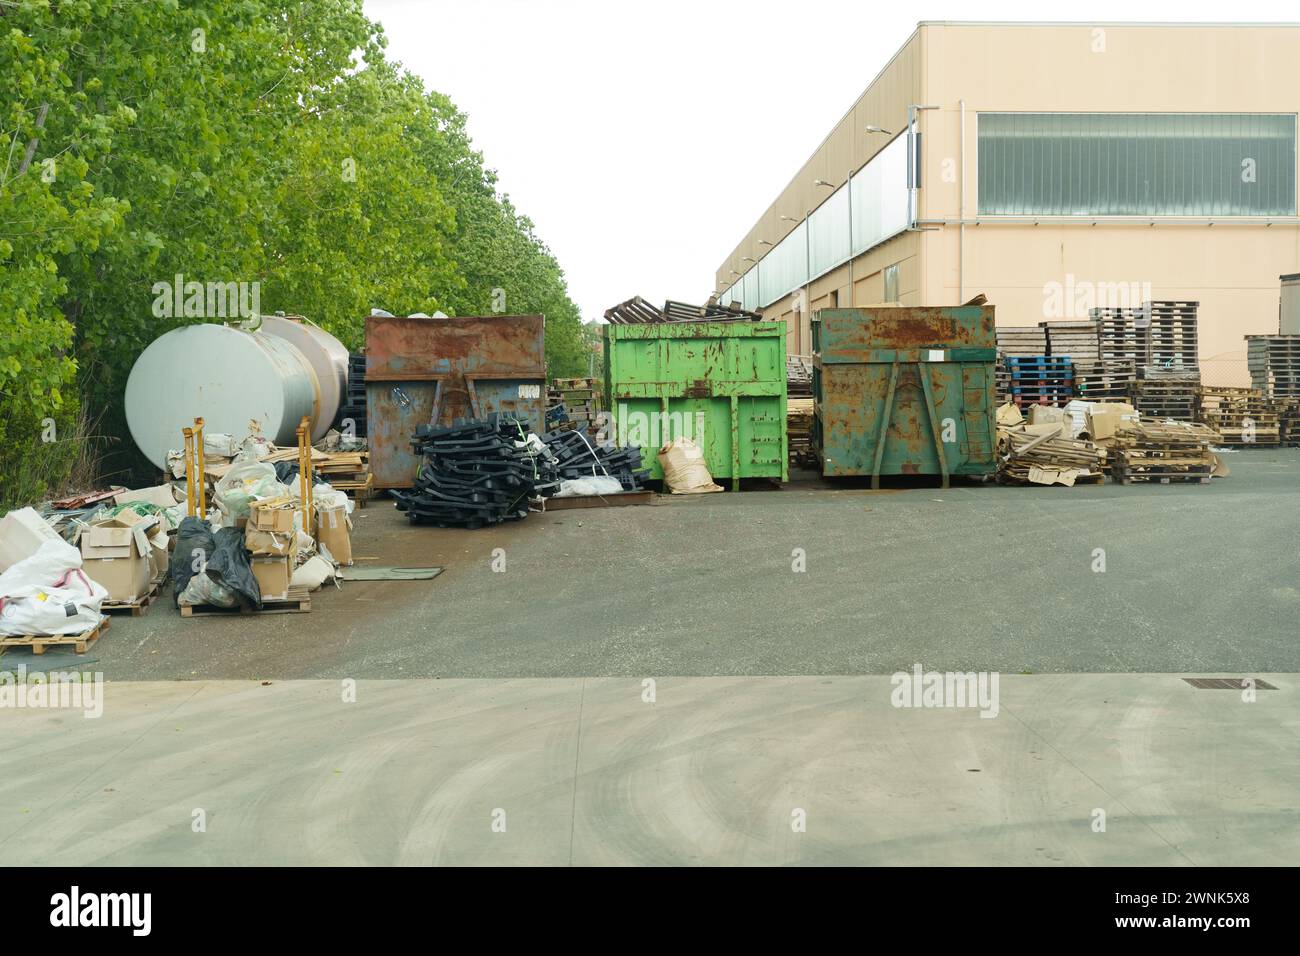 A significant amount of trash piled up in front of a building, creating a sight of environmental degradation and neglect. Stock Photo